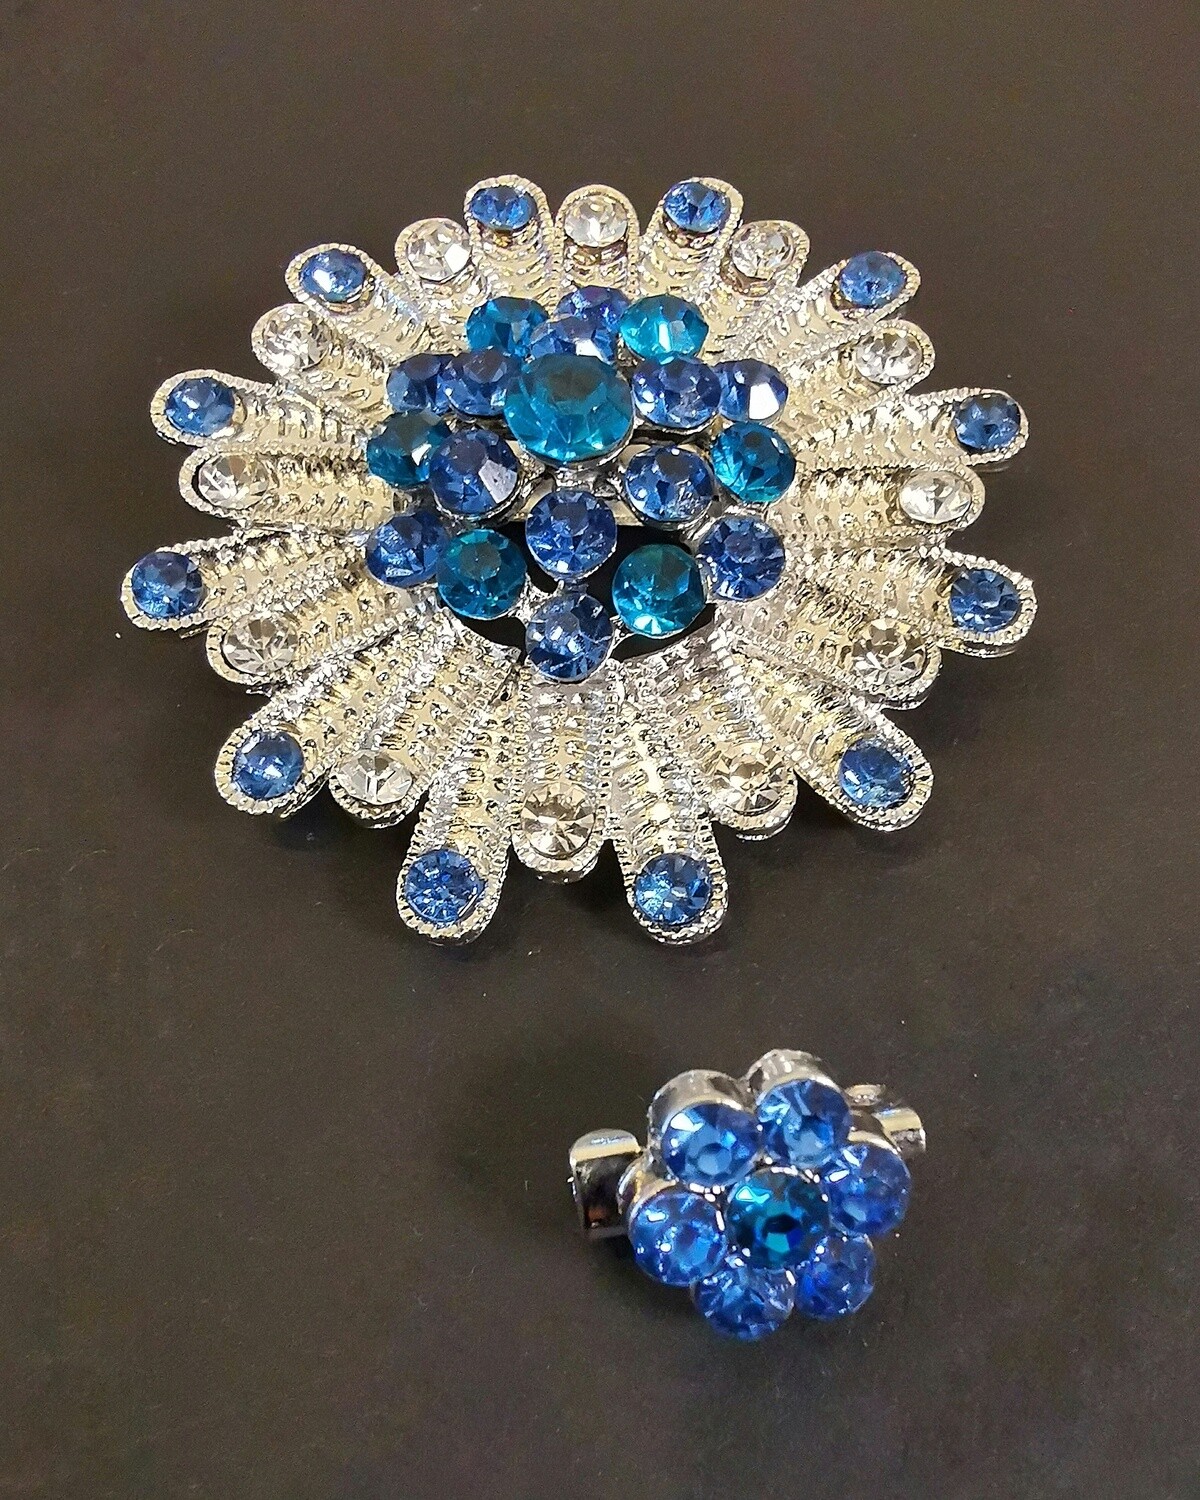 Halcyon Blue Ocean Star Brooch and Pin